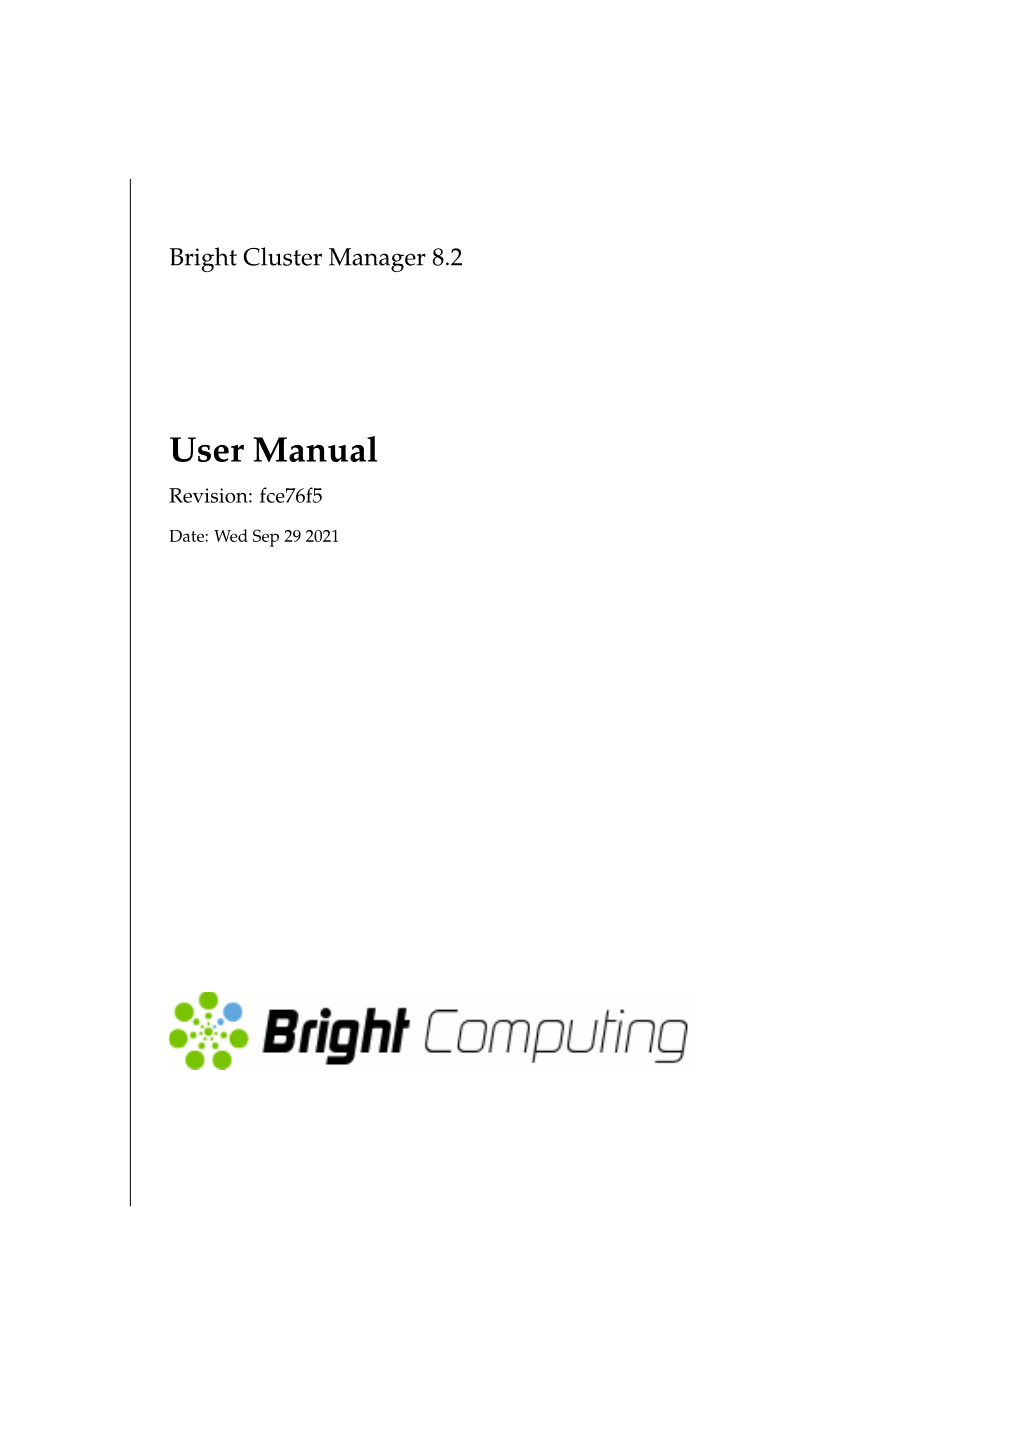 Bright Cluster Manager 8.2 User Manual